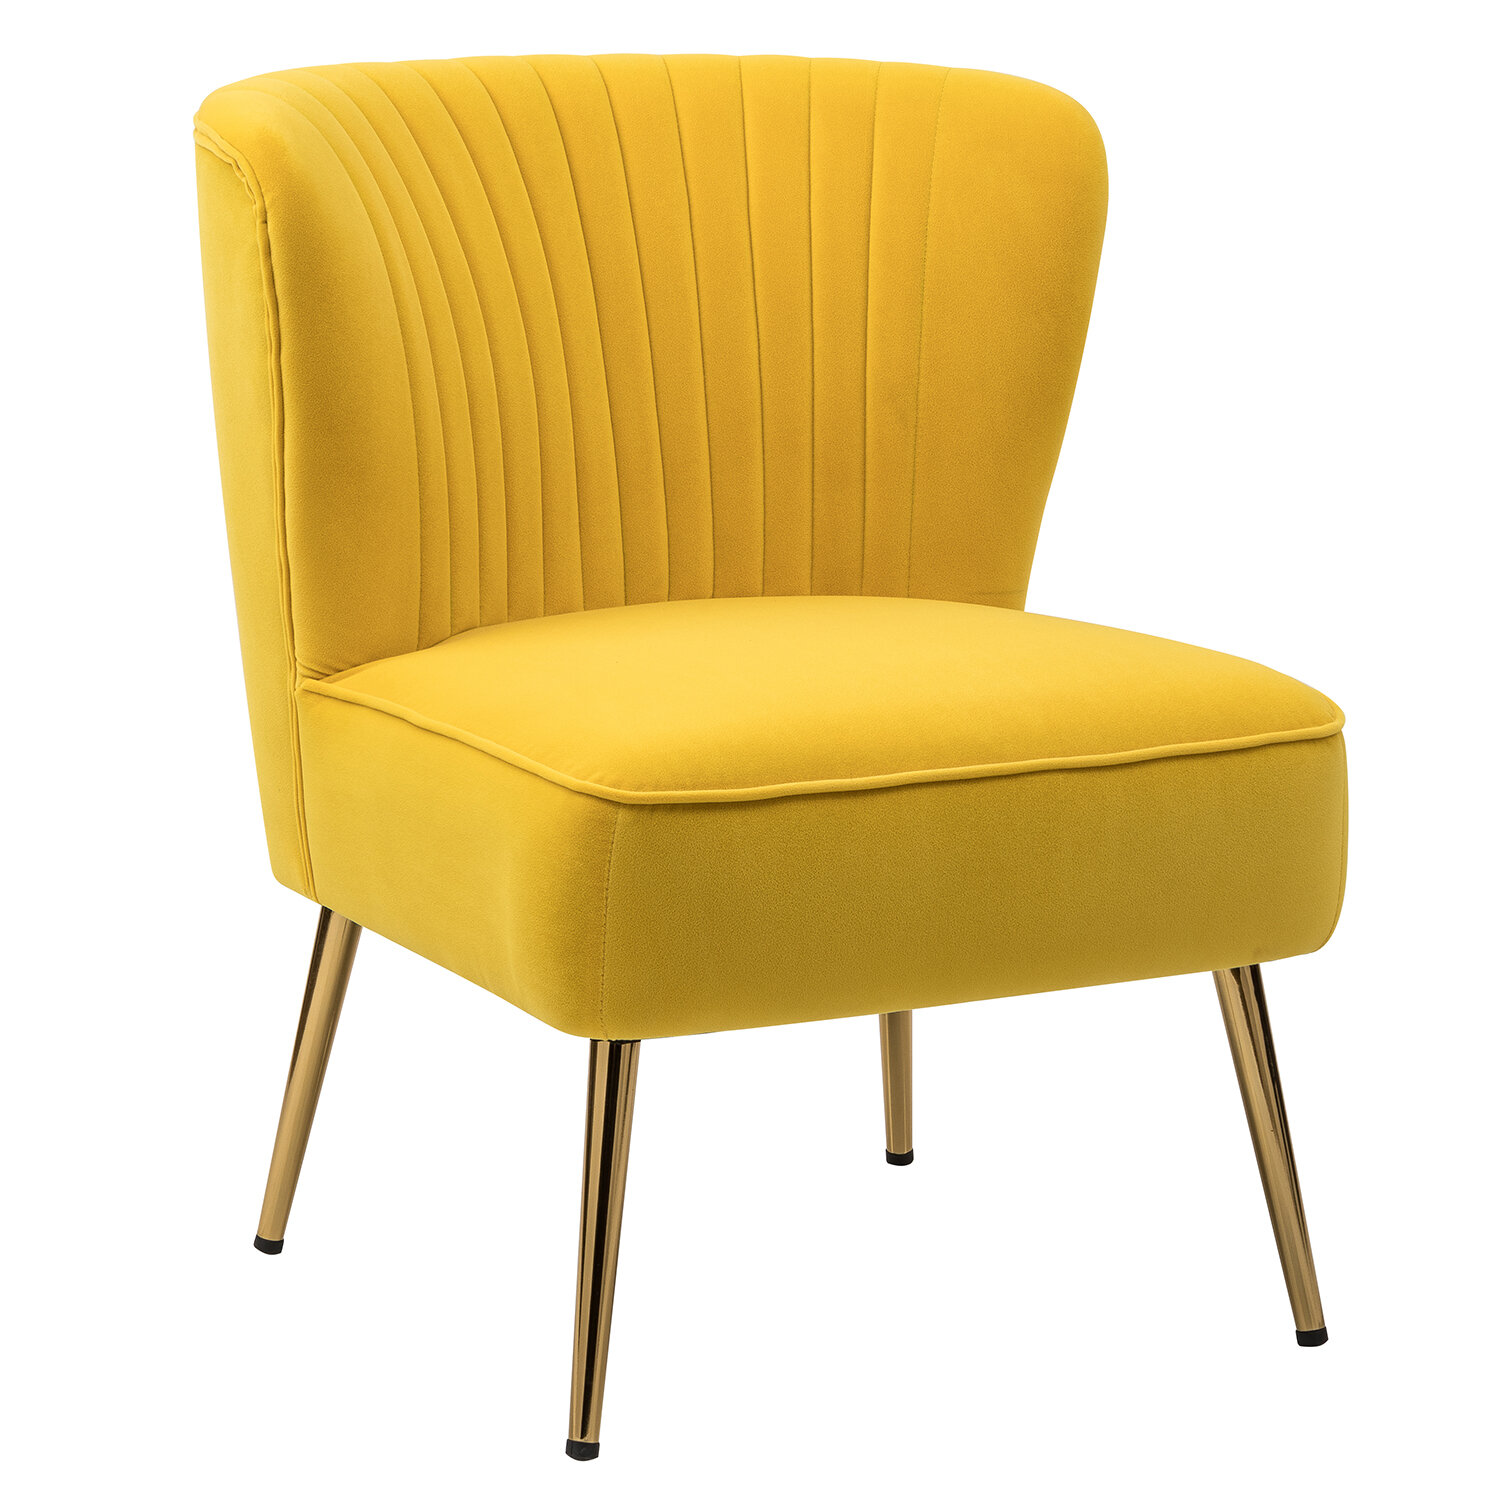 yellow comfy chair